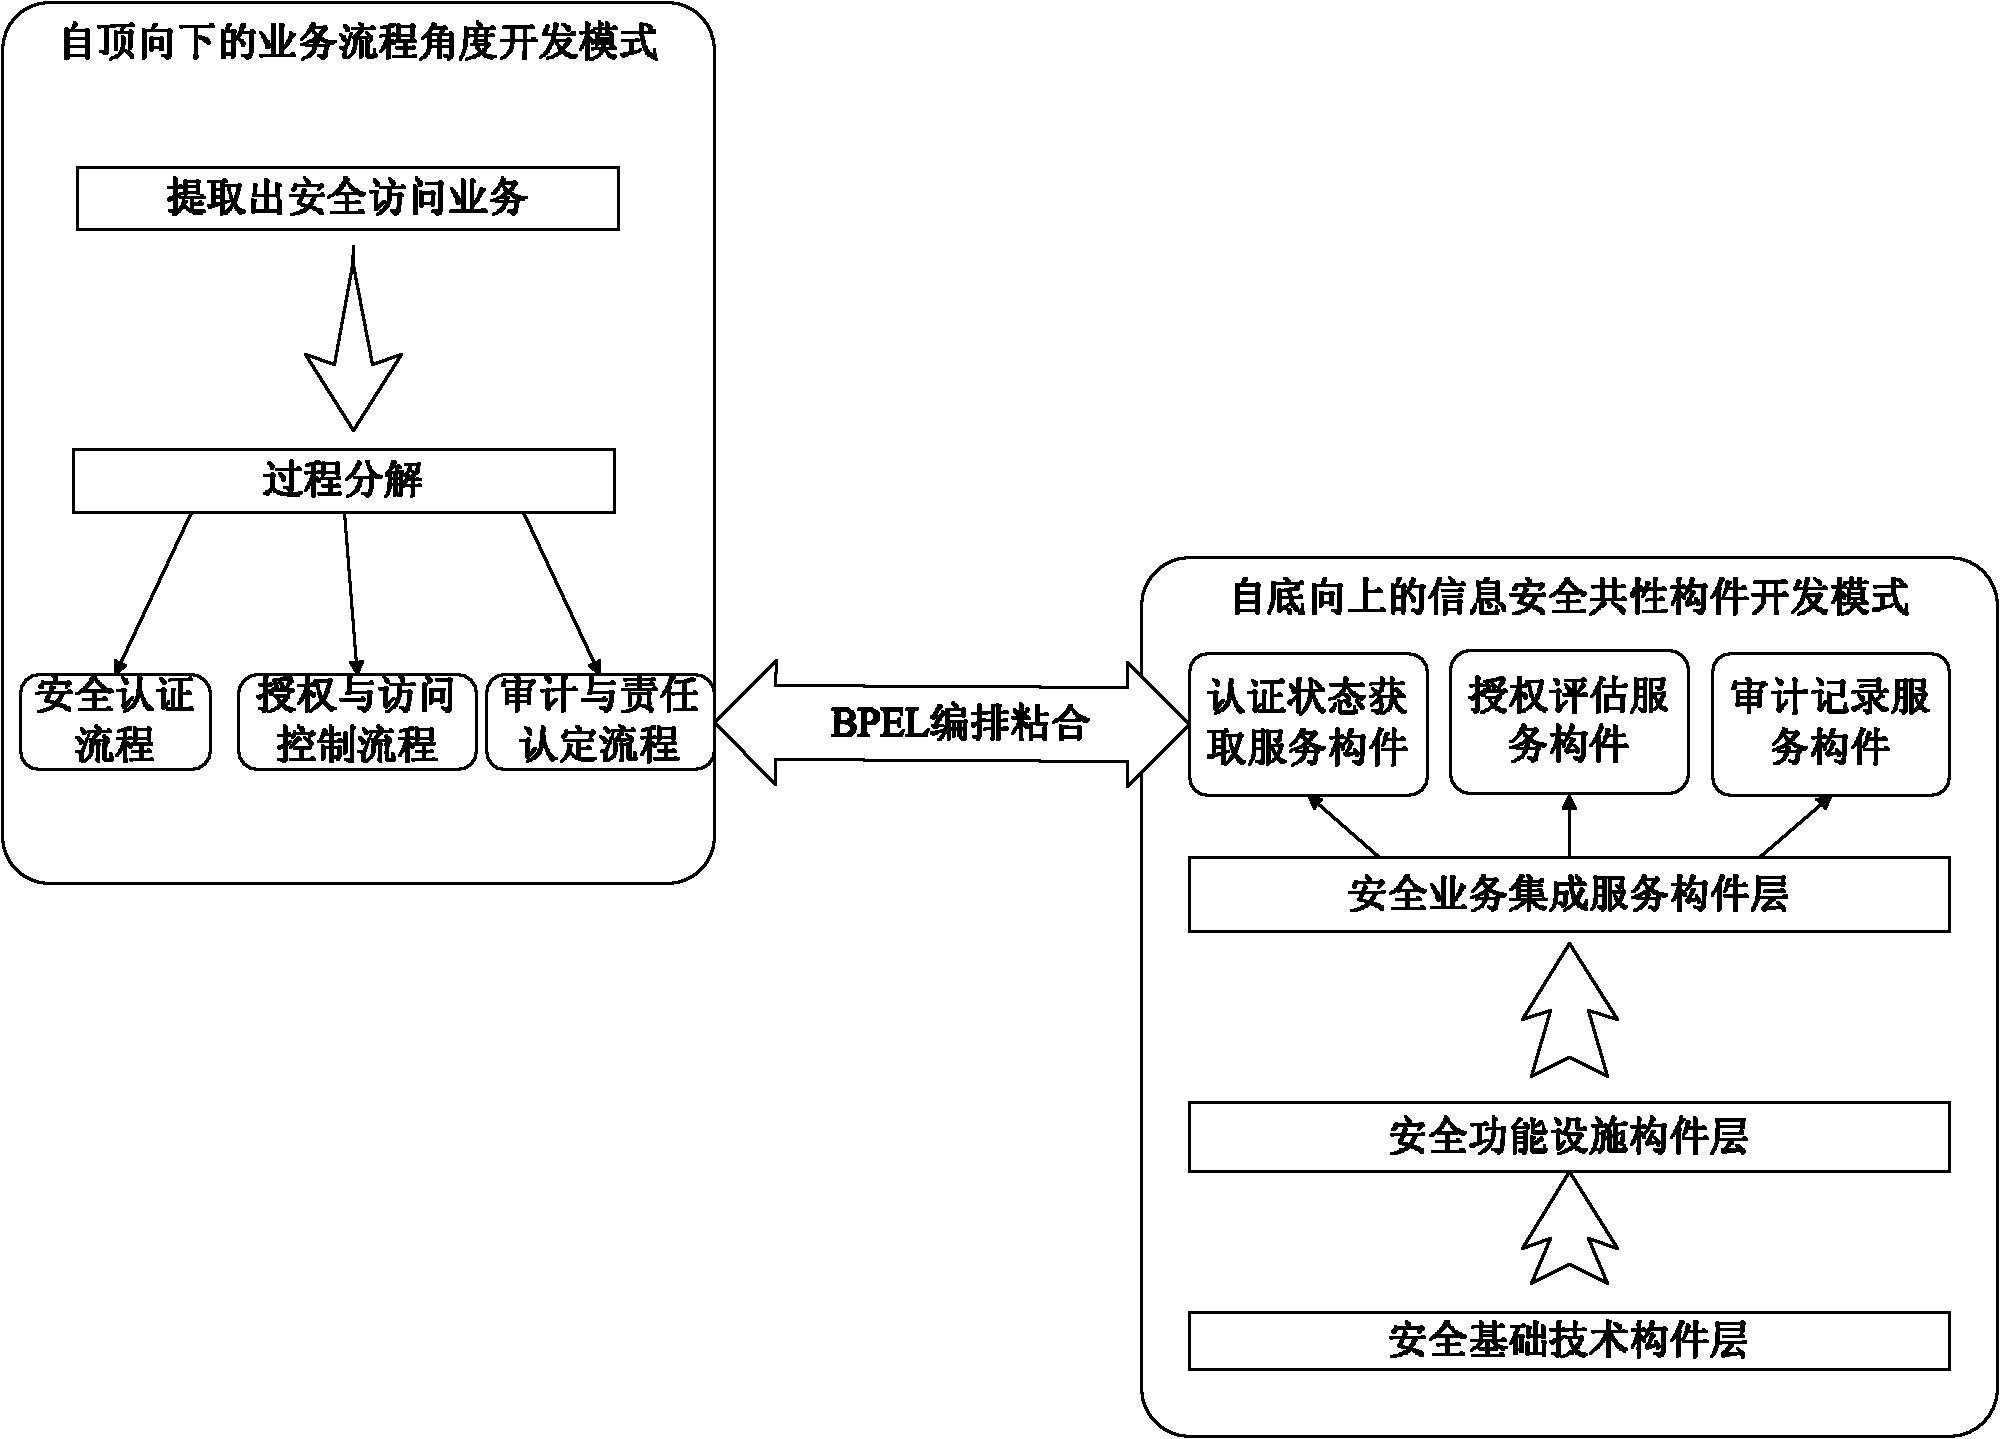 Business process execution language (BPEL)-based secure access service integration modeling method